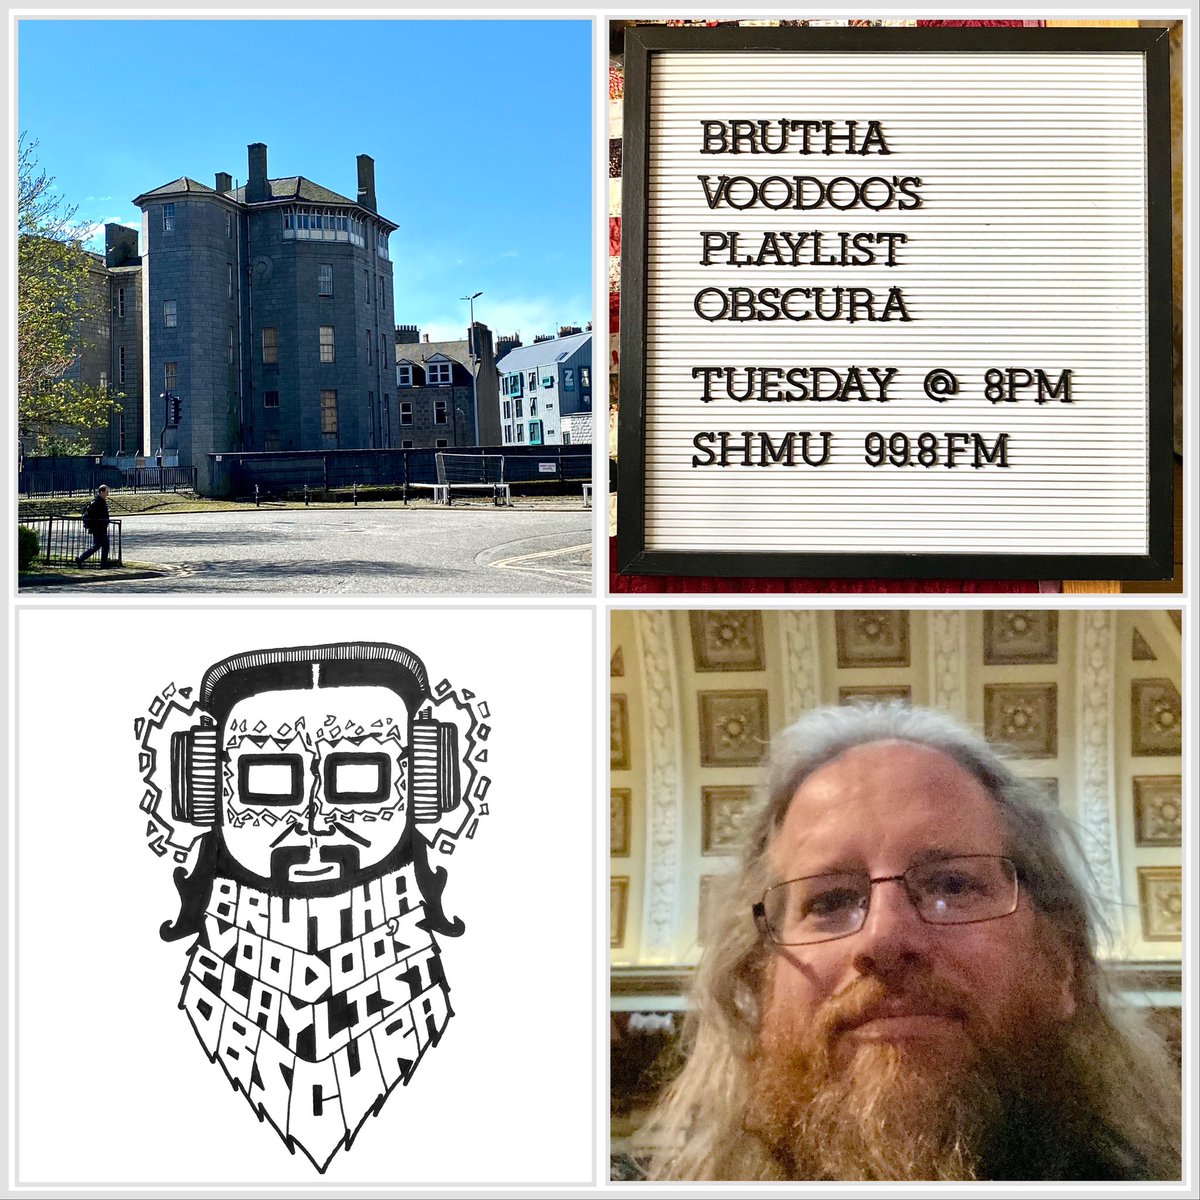 Join me LIVE at 8pm on ShmuFM tonight for Brutha Voodoo’s Playlist Obscura! Nearly 2 hours of the best underground, unheard & unusual music 99.8FM & DAB in Aberdeen, online at shmu.org.uk/fm/Listen or ask your smart speaker to “Play Station House Media Unit” #ExploreTheObscure